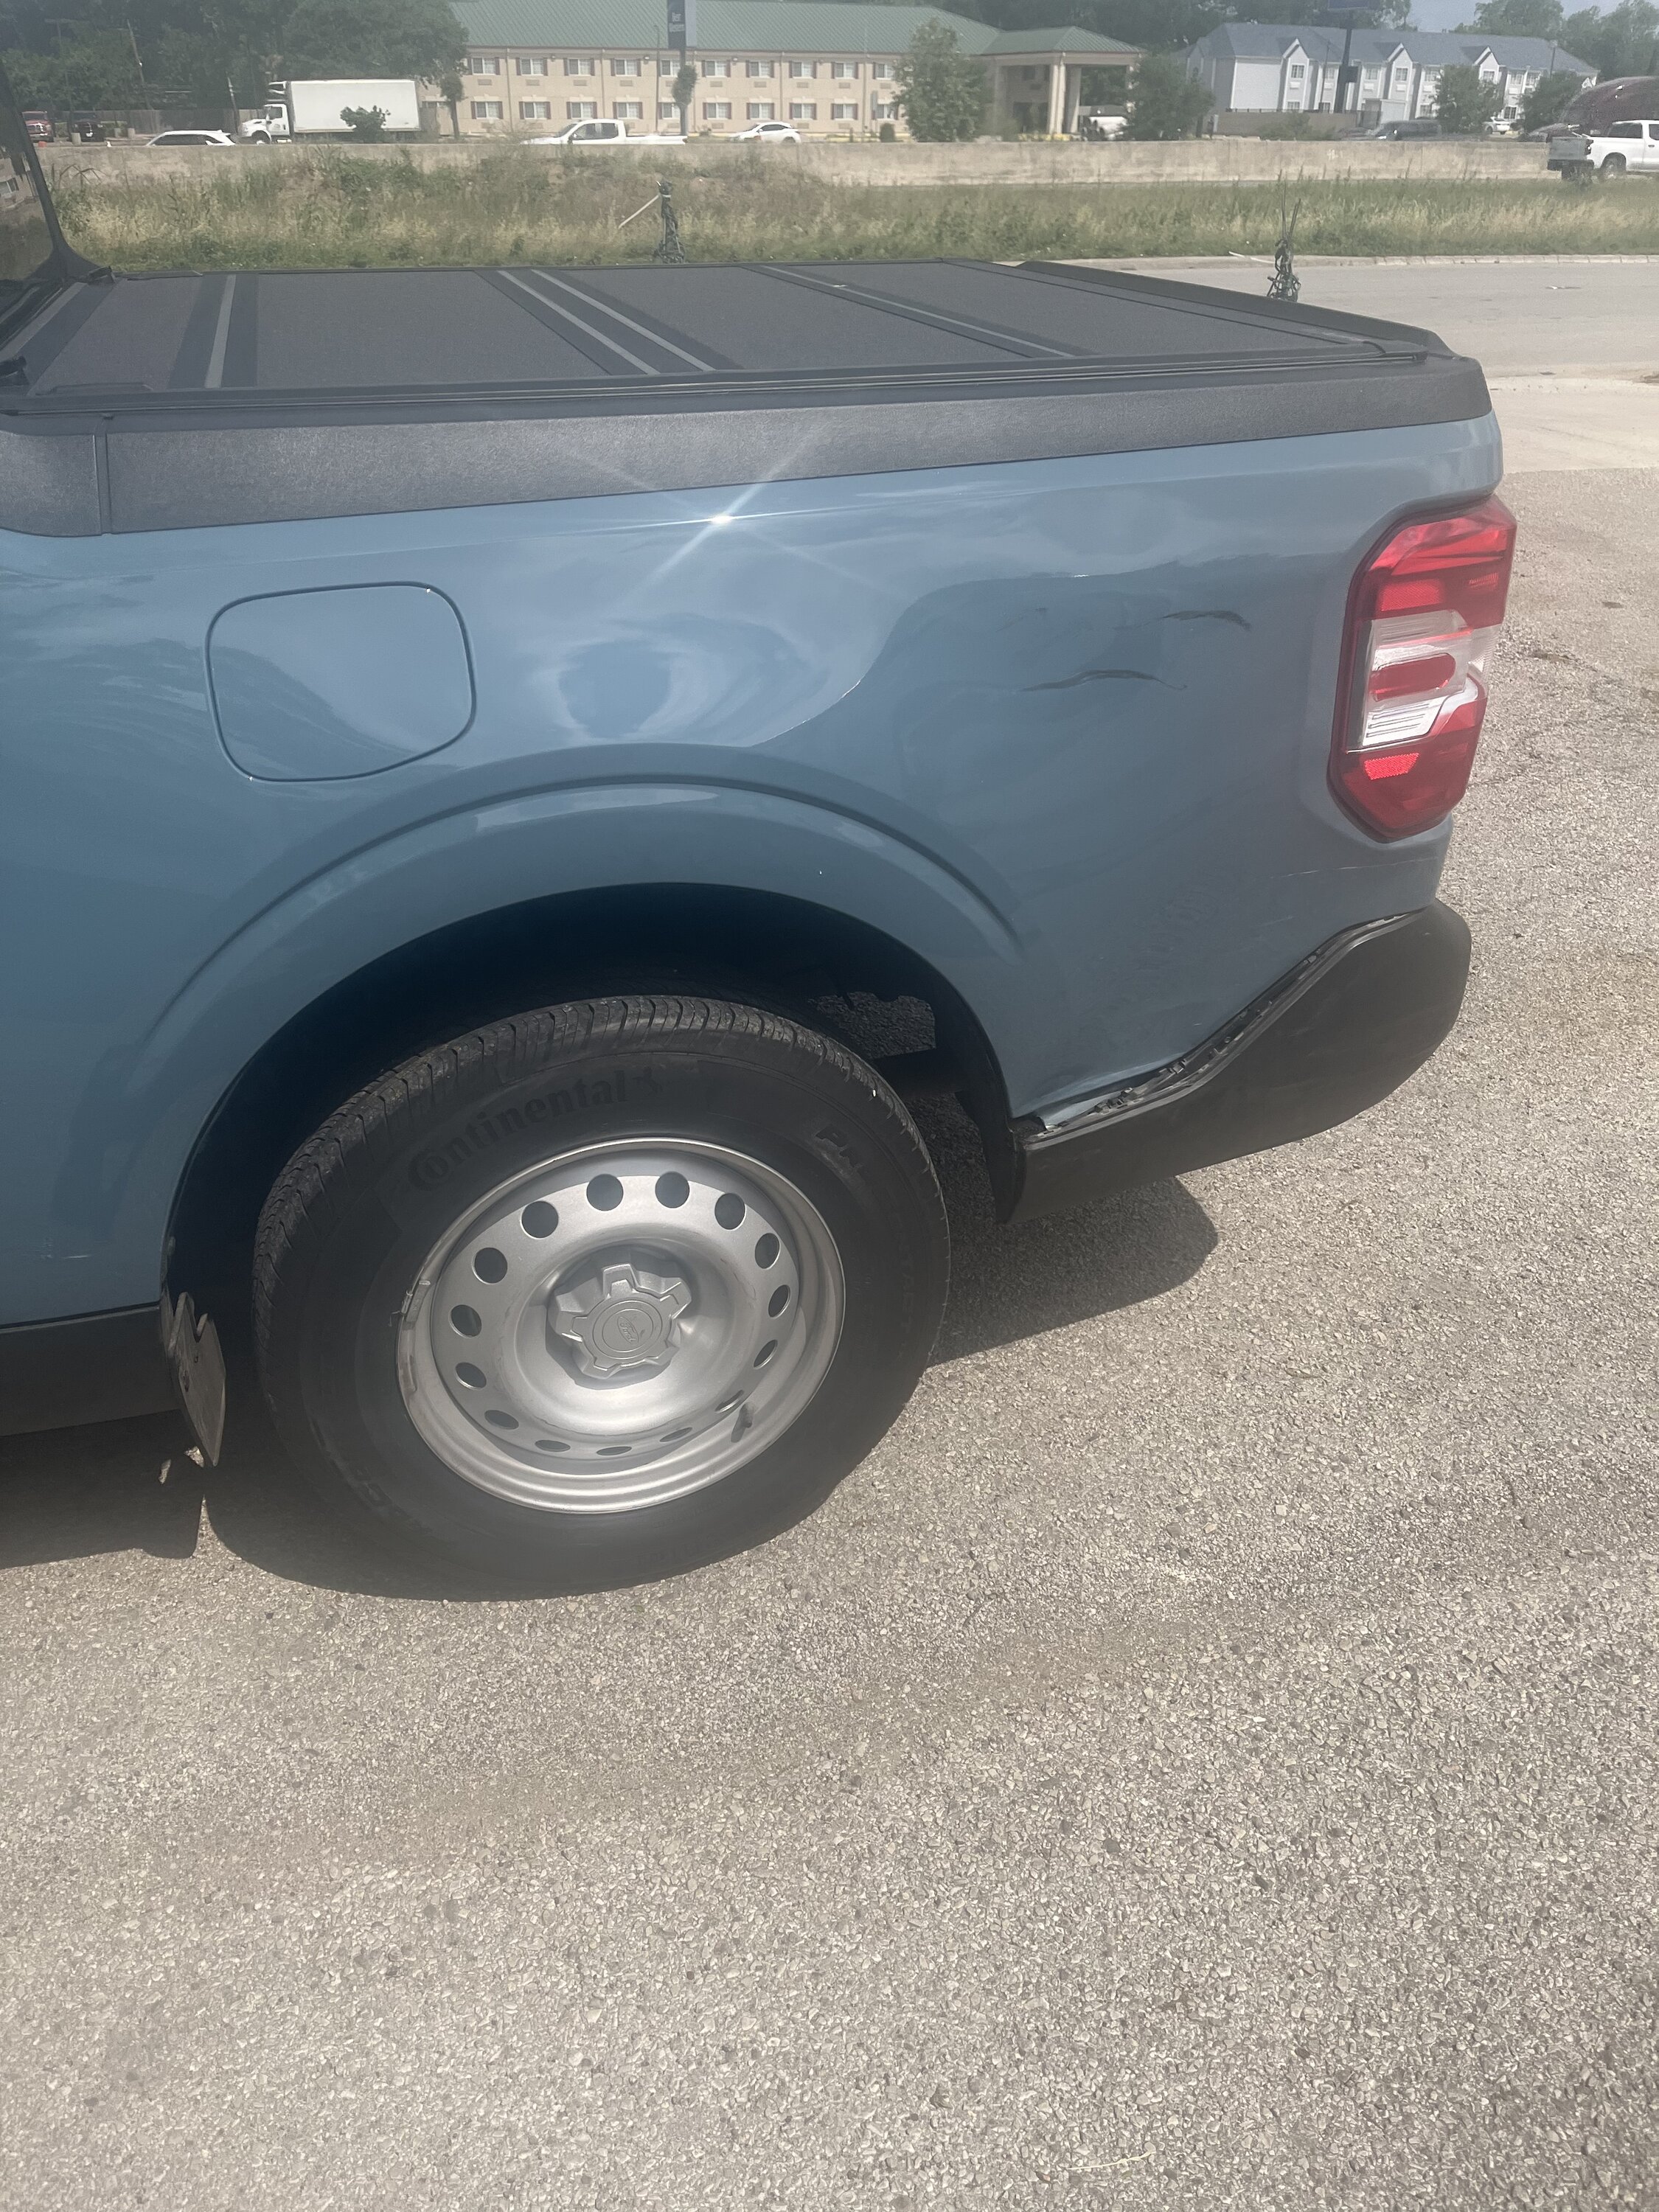 Bumper covers fading from sun  MaverickTruckClub - 2022+ Ford Maverick  Pickup Forum, News, Owners, Discussions